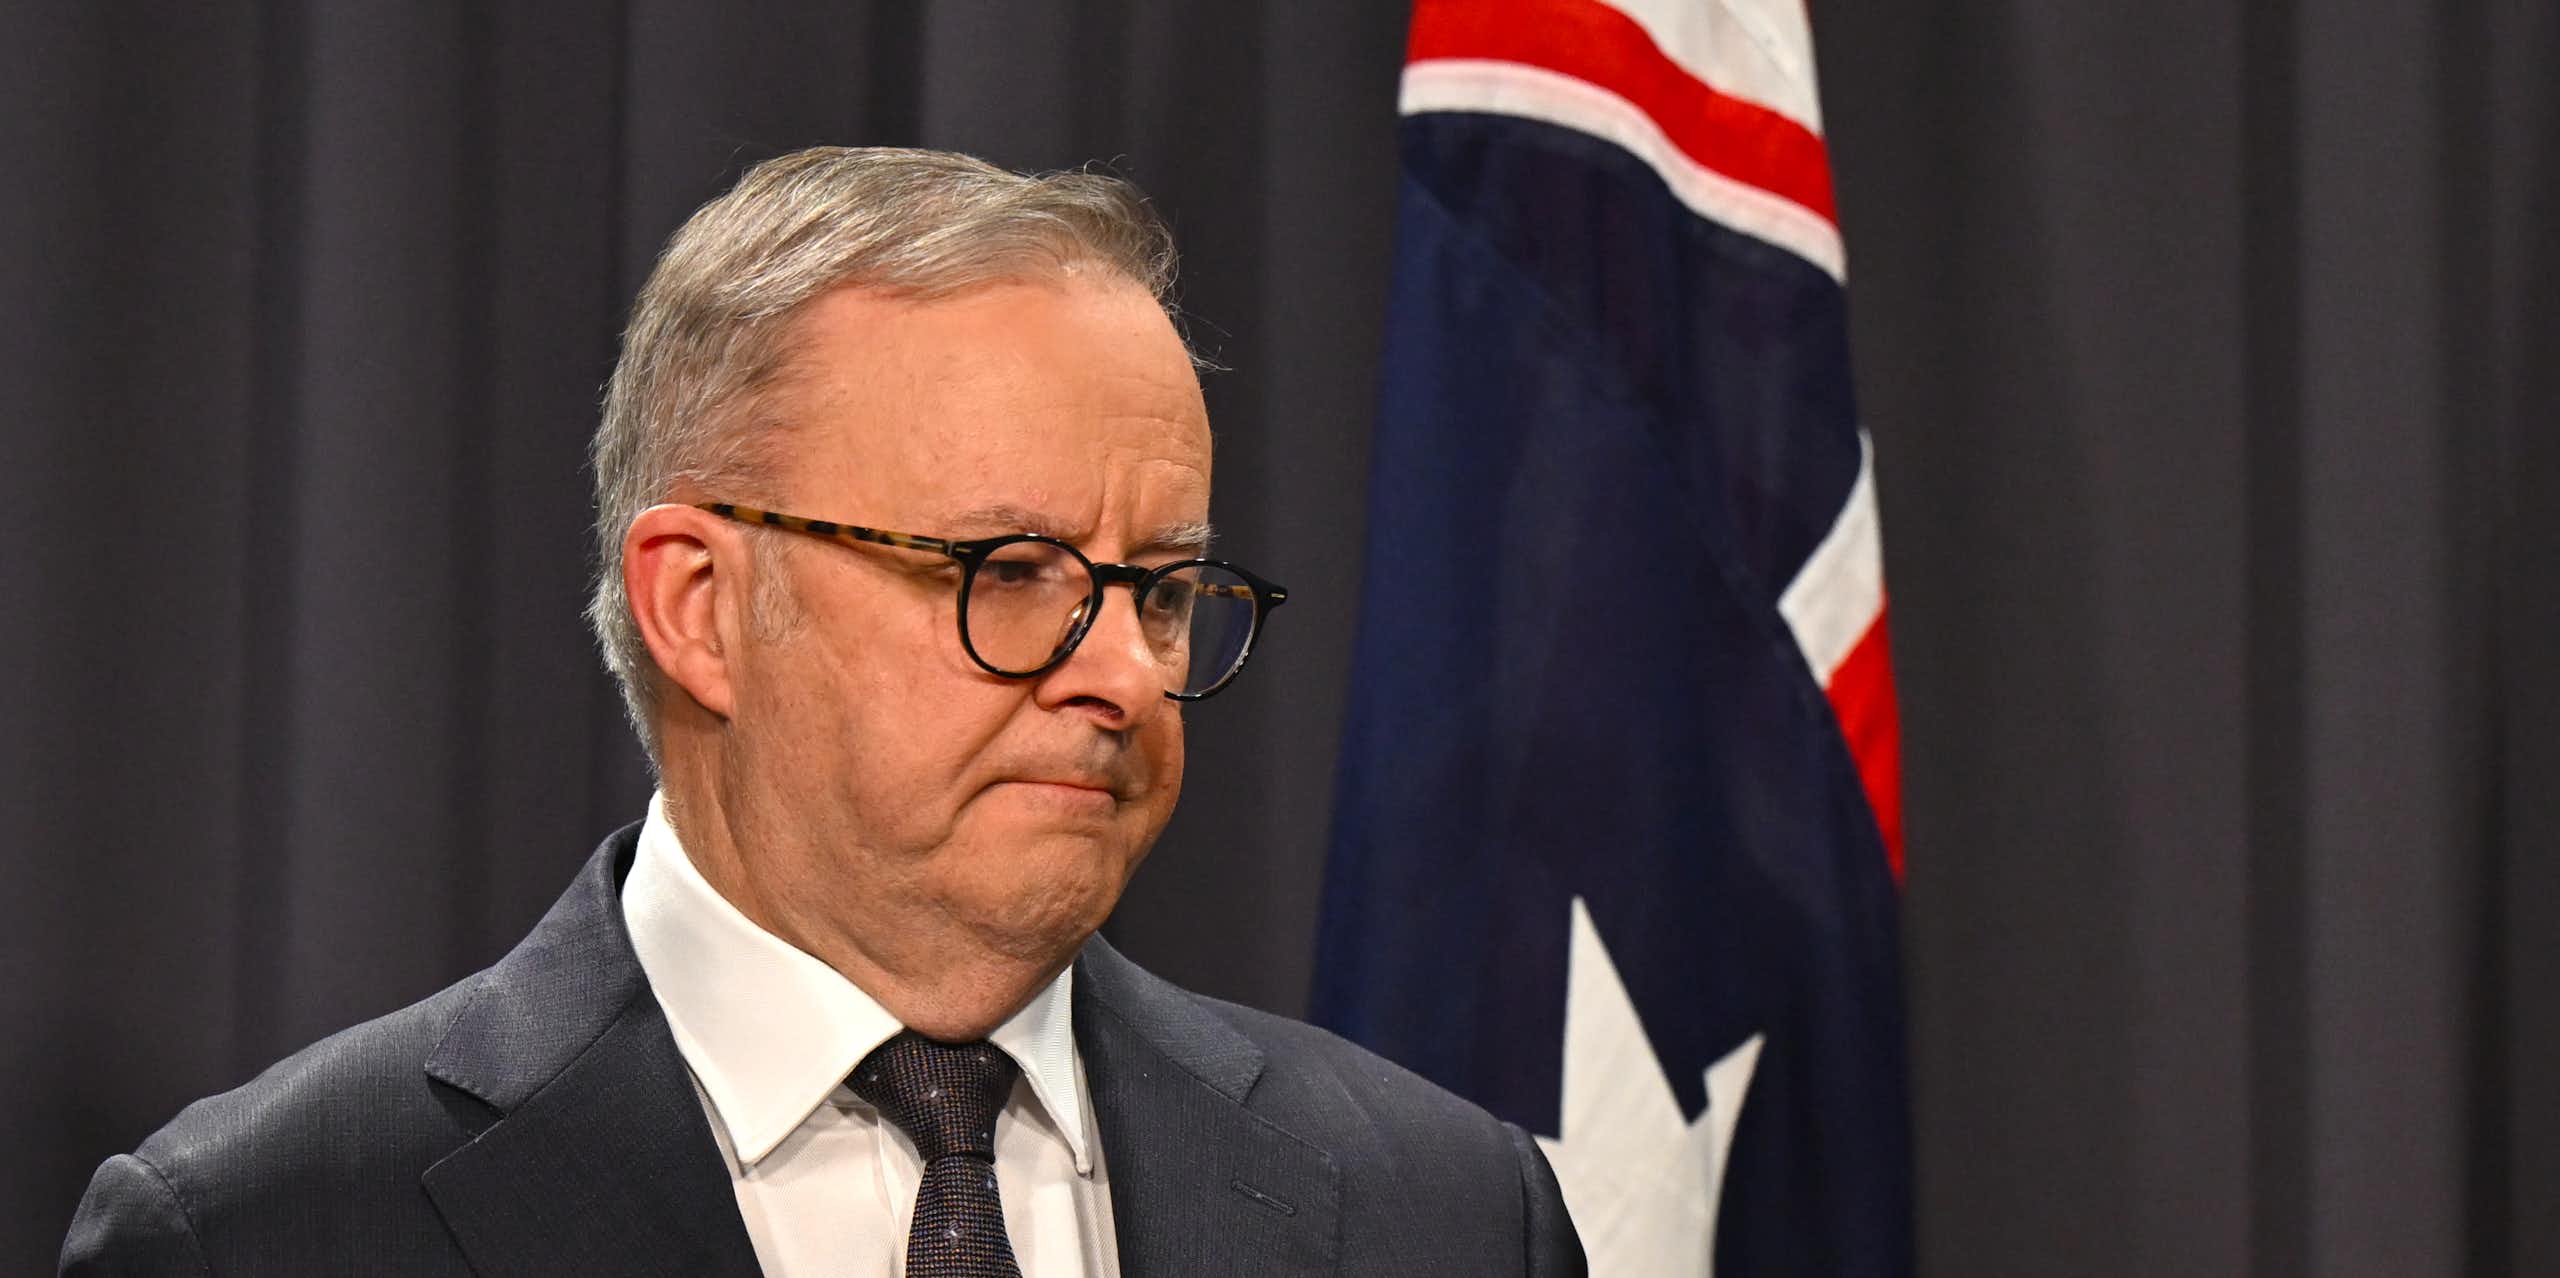 Labor maintains narrow Newspoll lead but drops in other polls